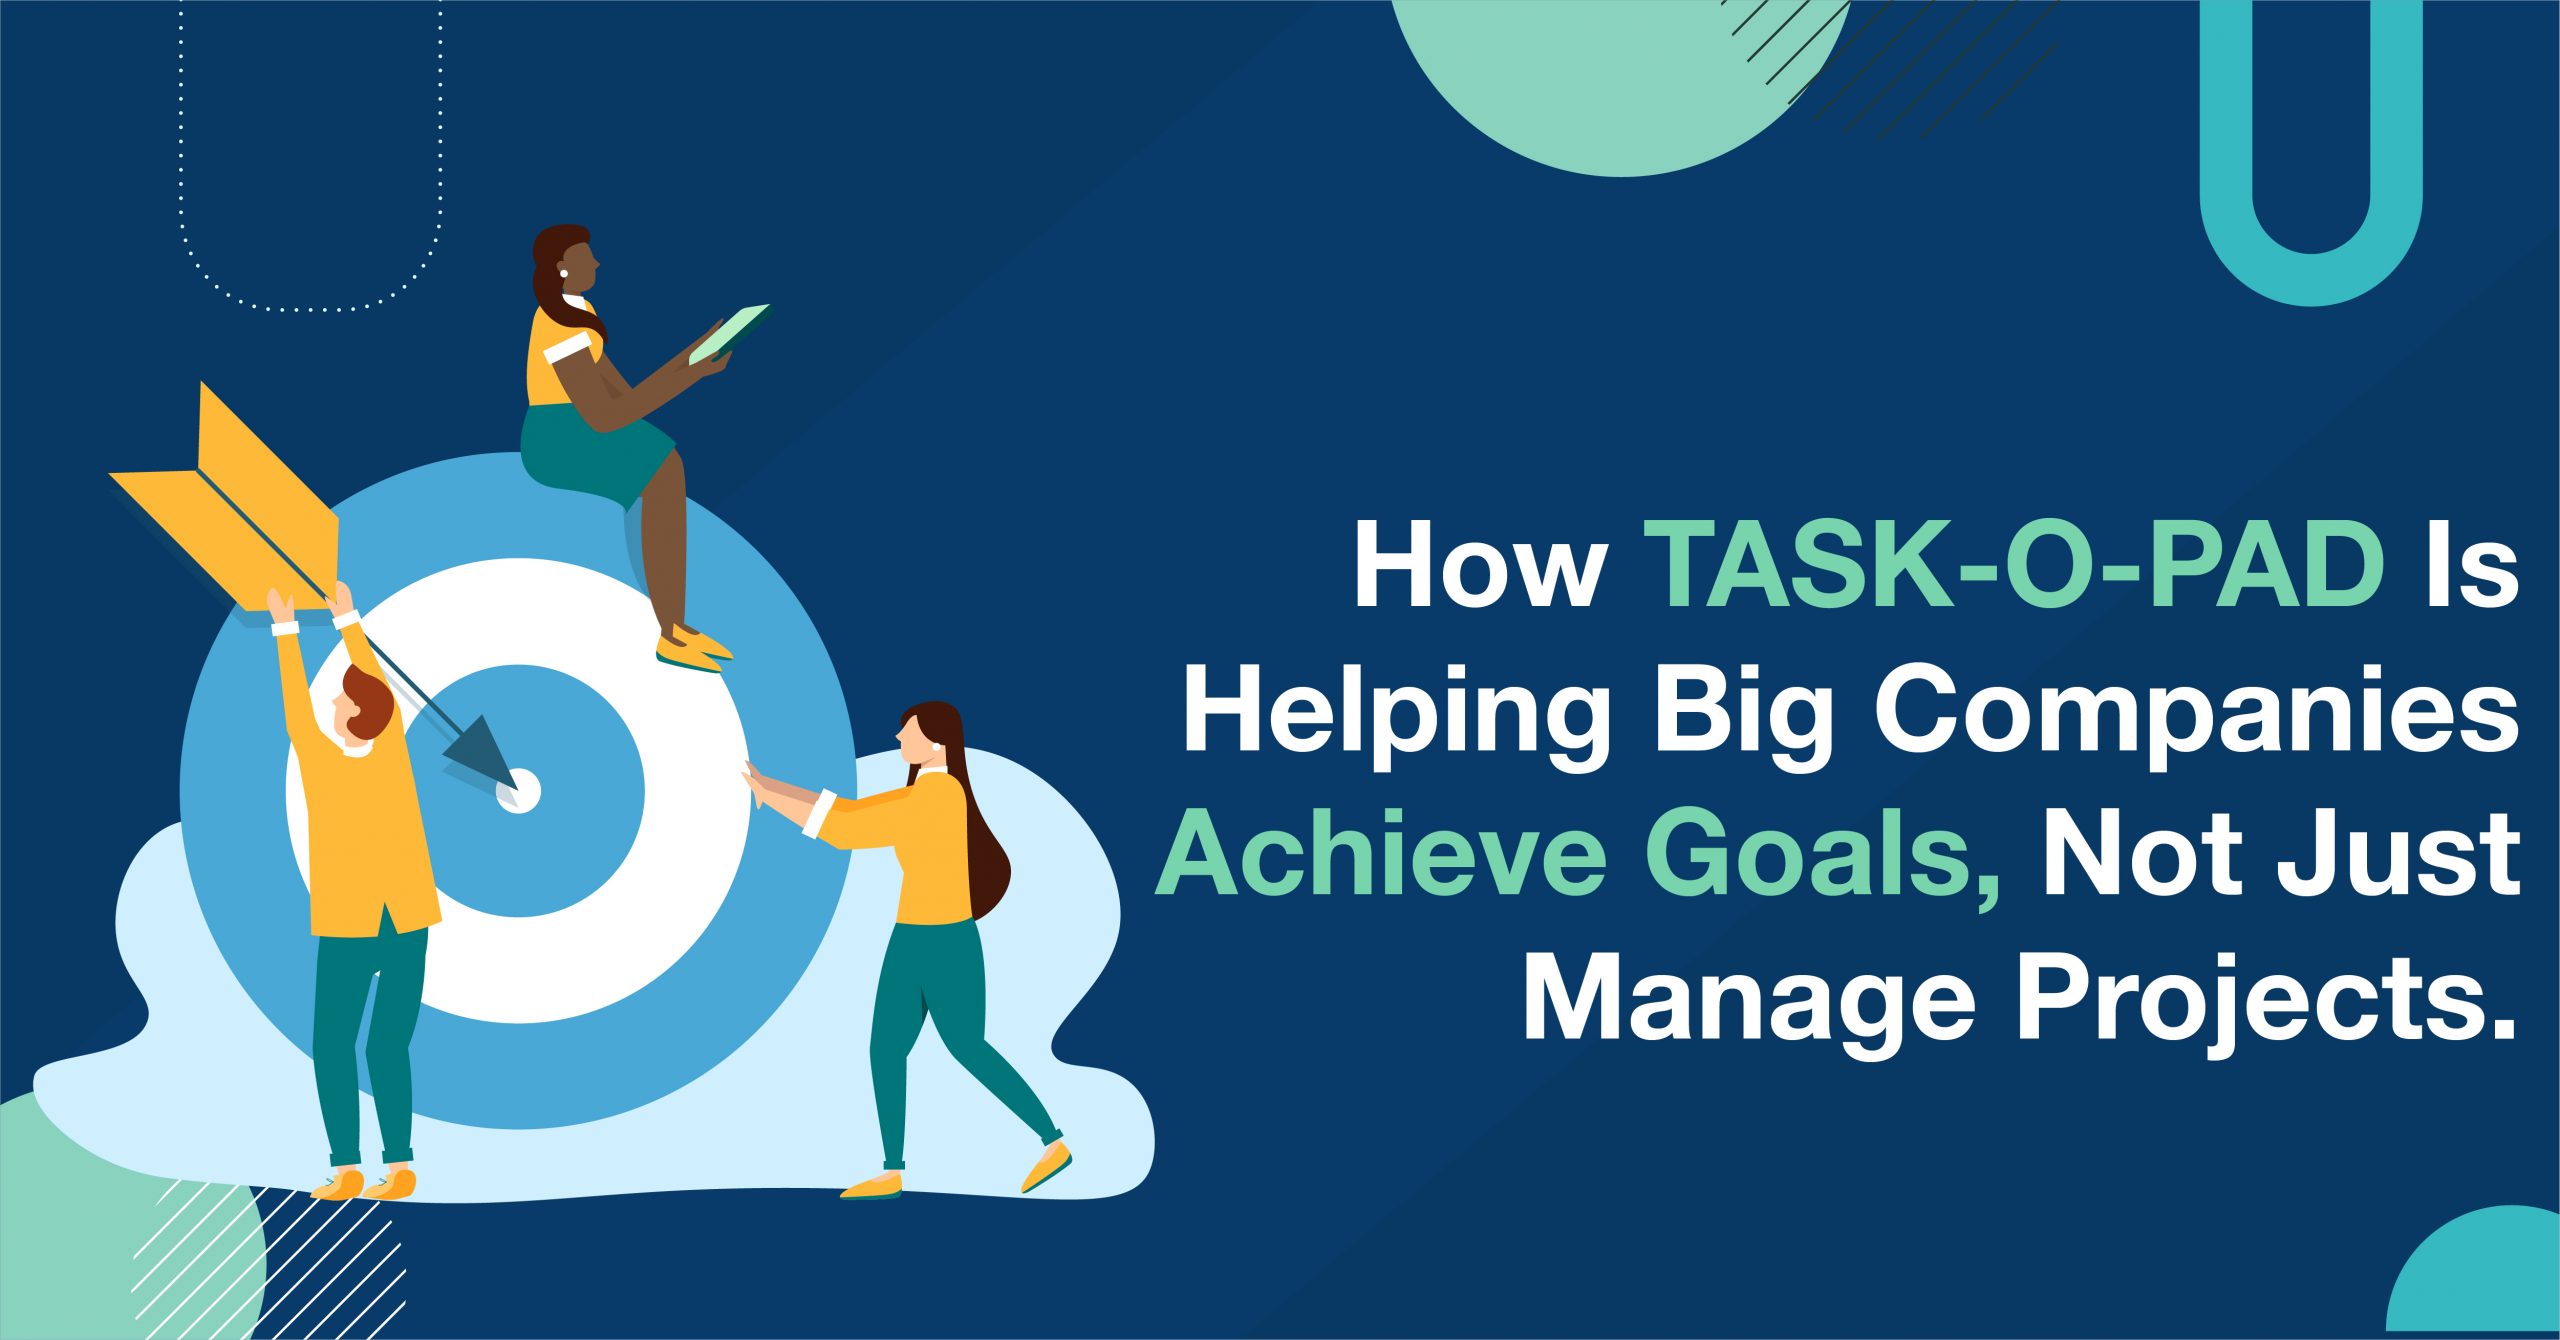 How Task-O-Pad is helping big companies achieve goals, not just manage projects.